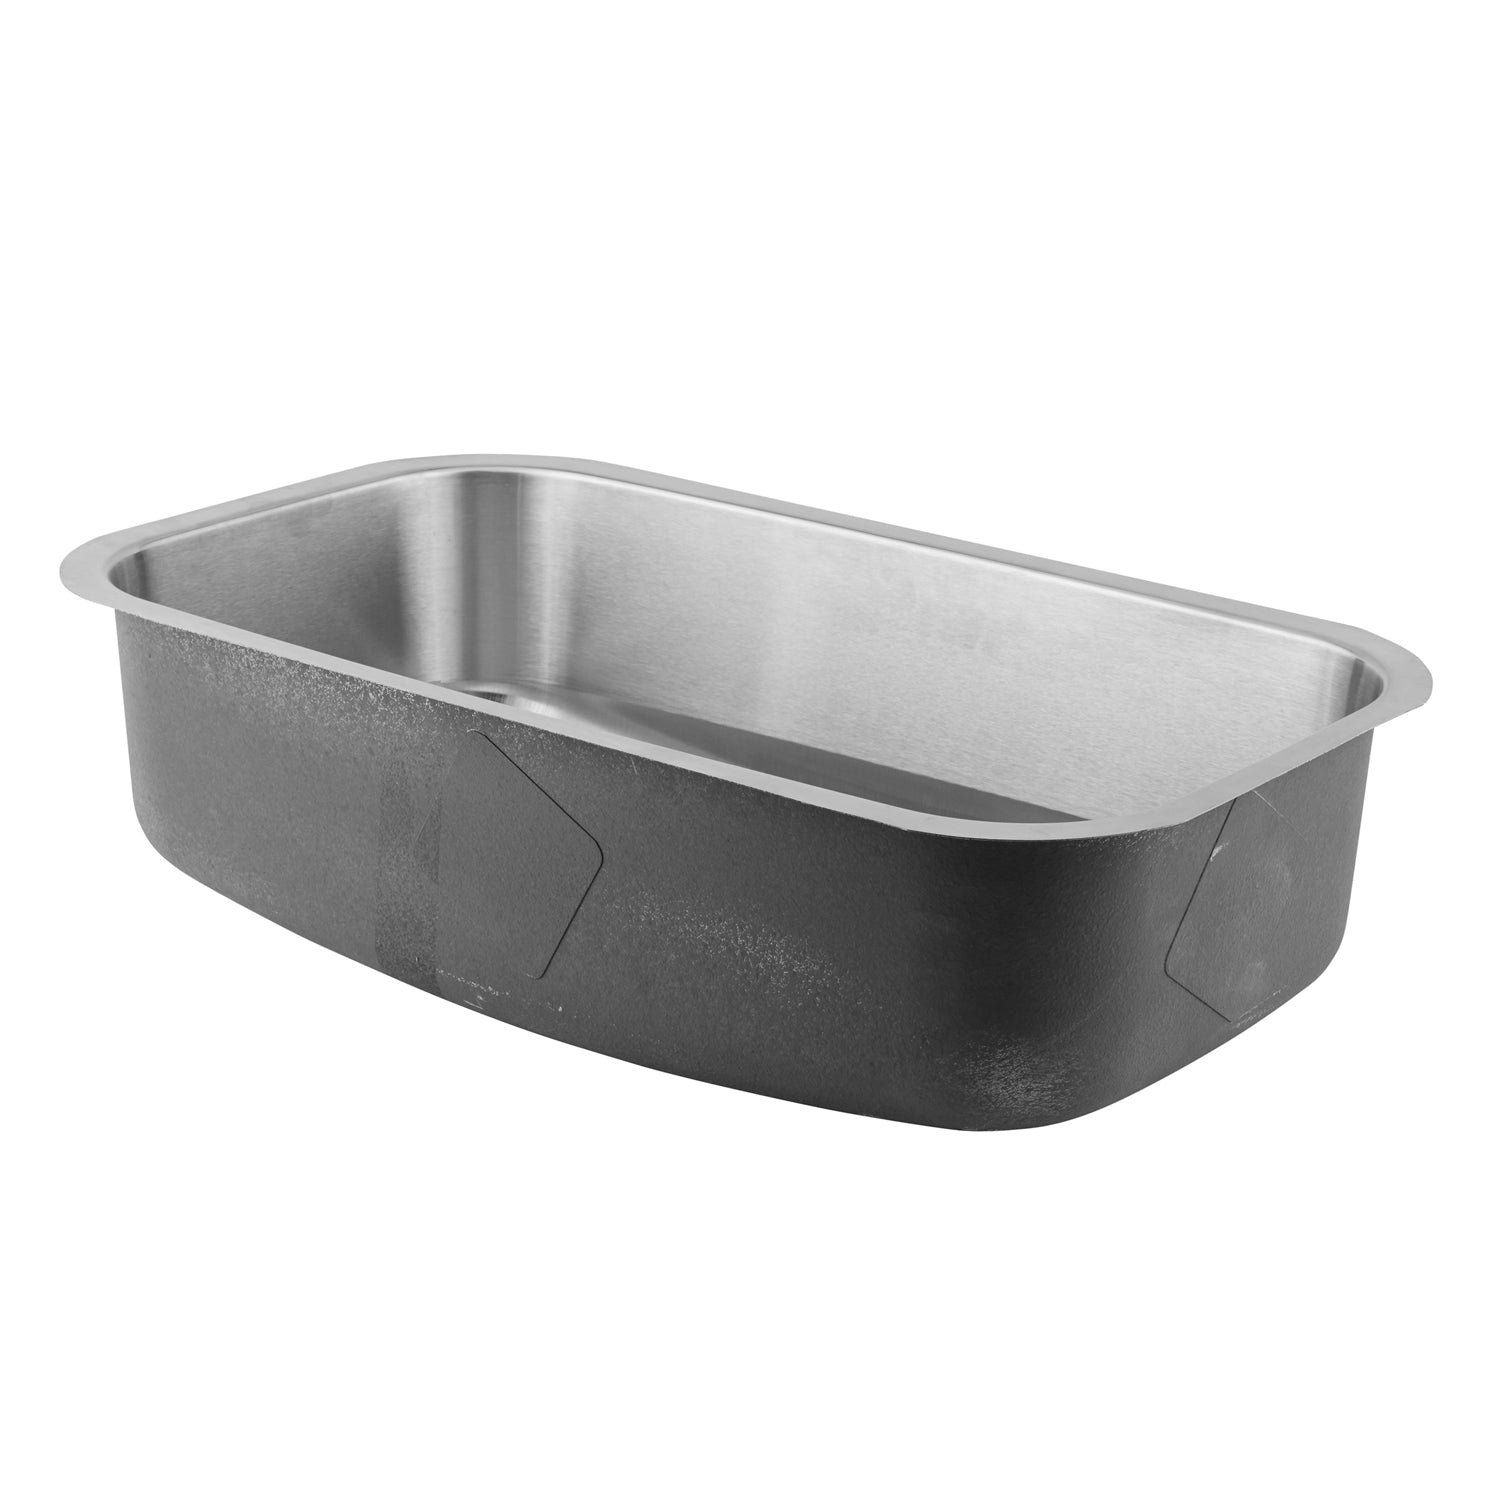 DAX Single Bowl Undermount Kitchen Sink, 18 Gauge Stainless Steel, Brushed Finish , 30 x 18 x 9 Inches (KA-3018)